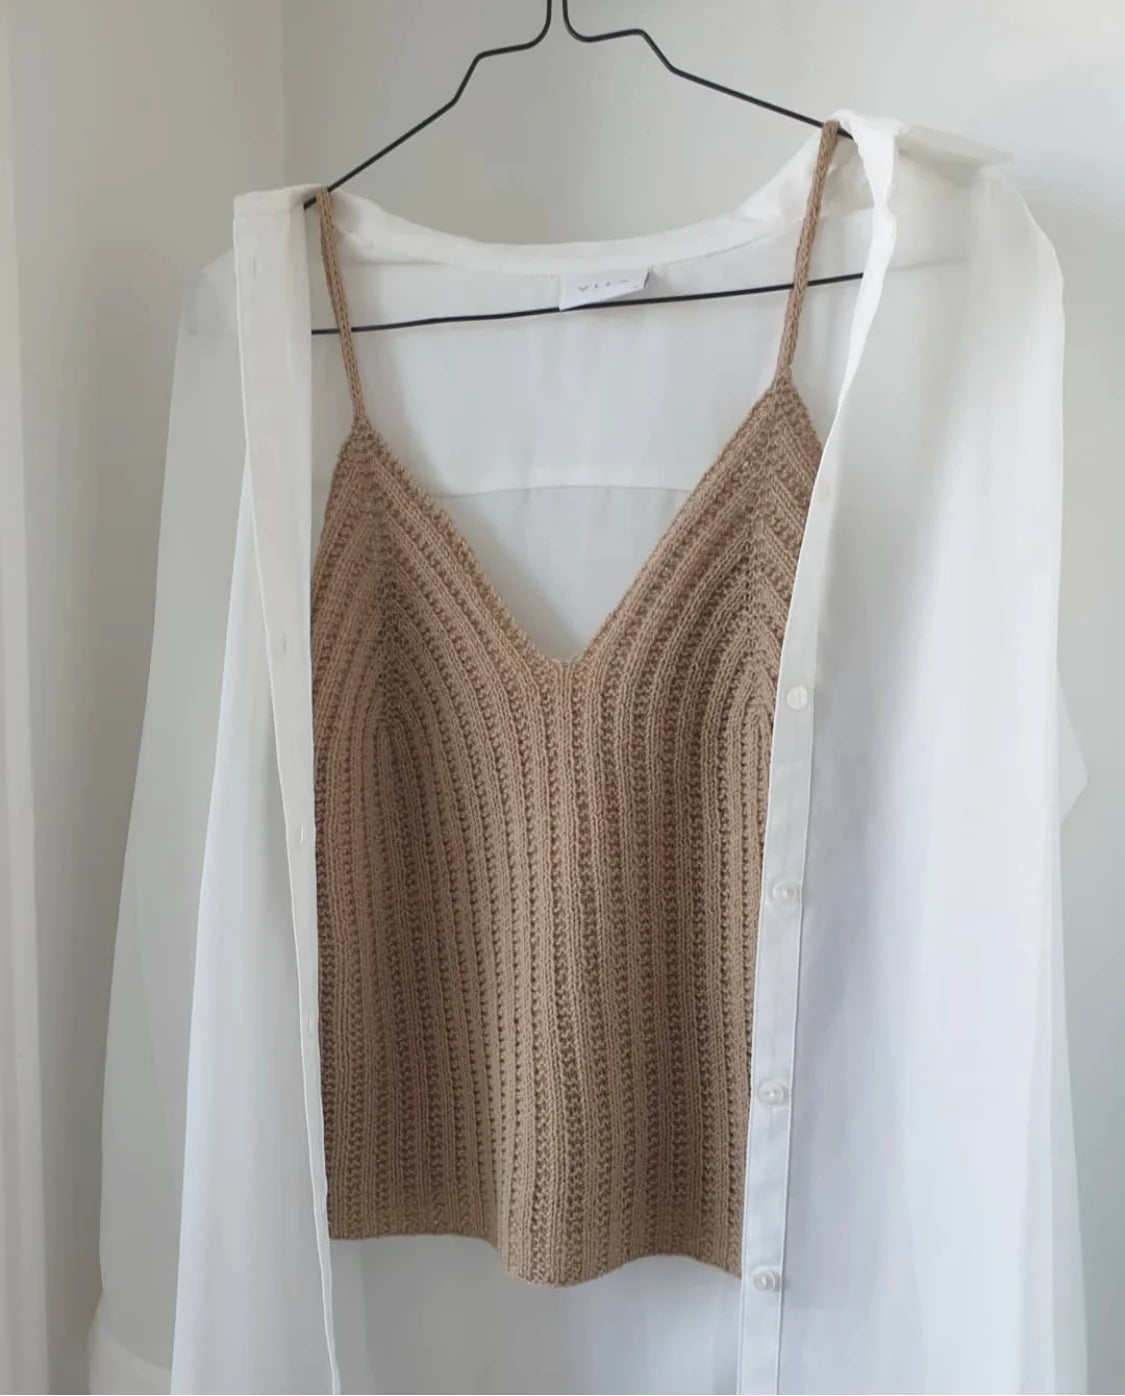 Camisole No. 4 My Favourite Things Knitwear - Strikkekit